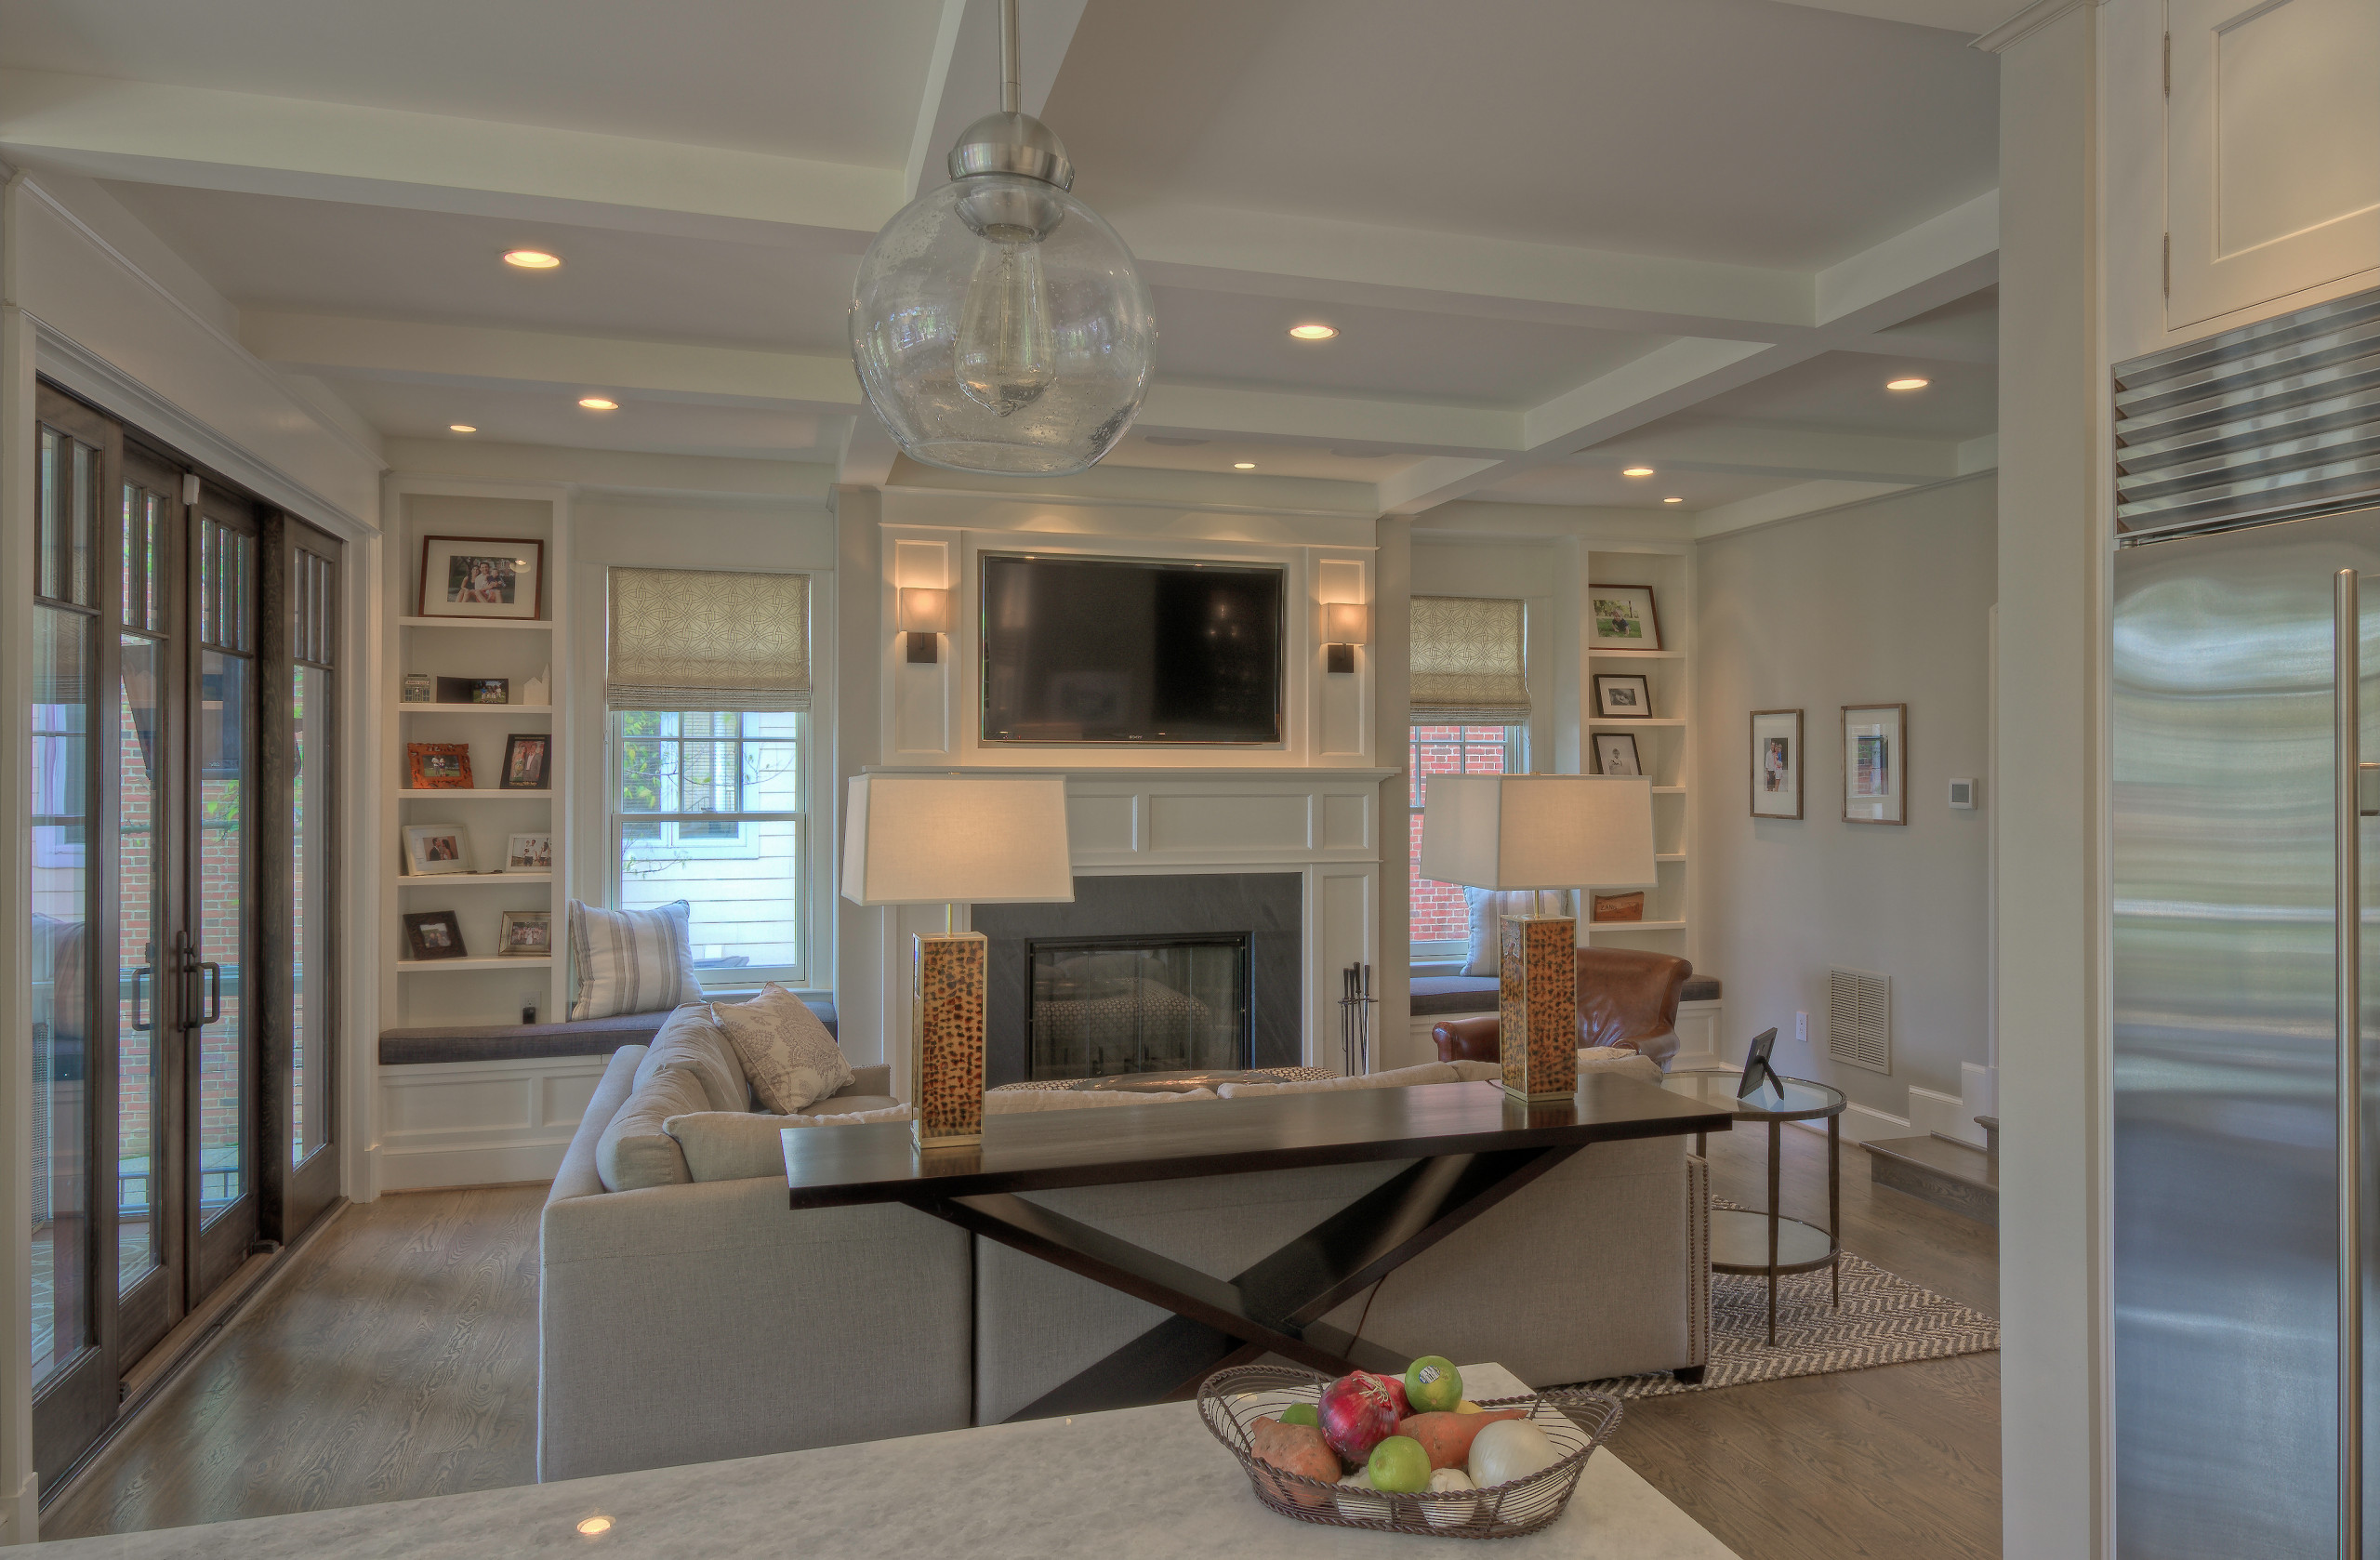 Built Ins Around Fireplace Houzz, Rock Fireplace With Built In Bookcase Designs